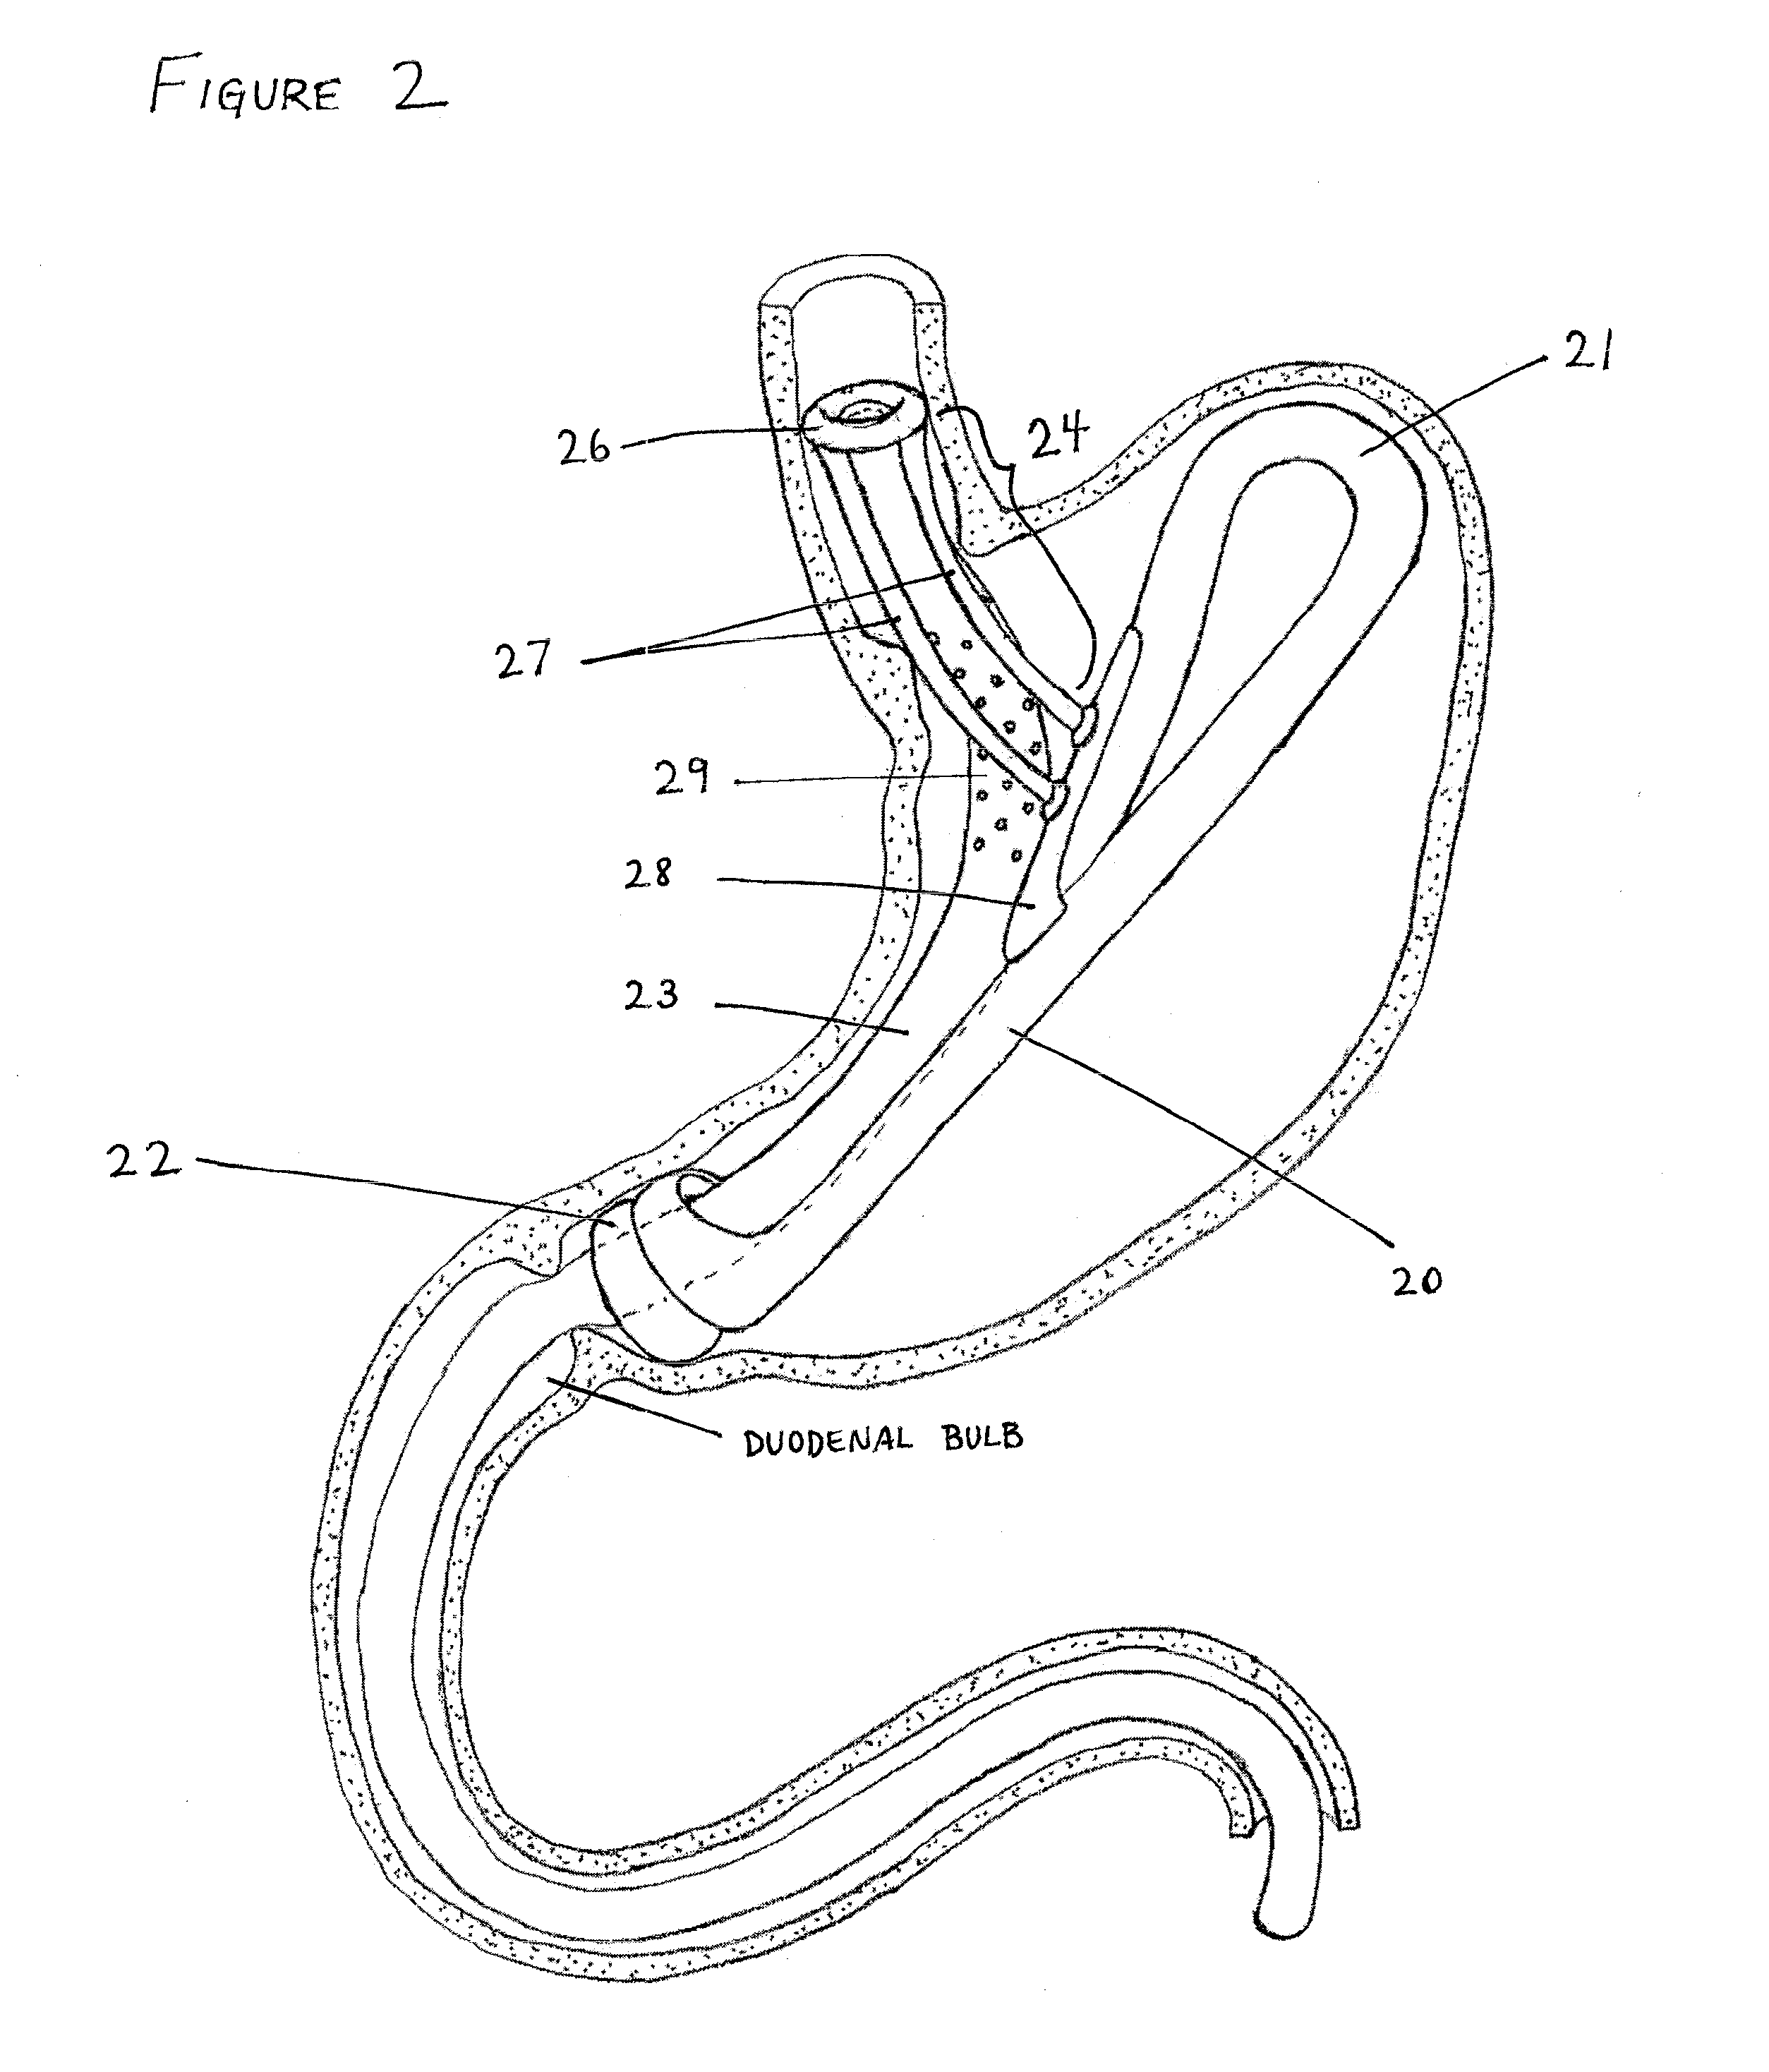 Intragastric Implant Devices